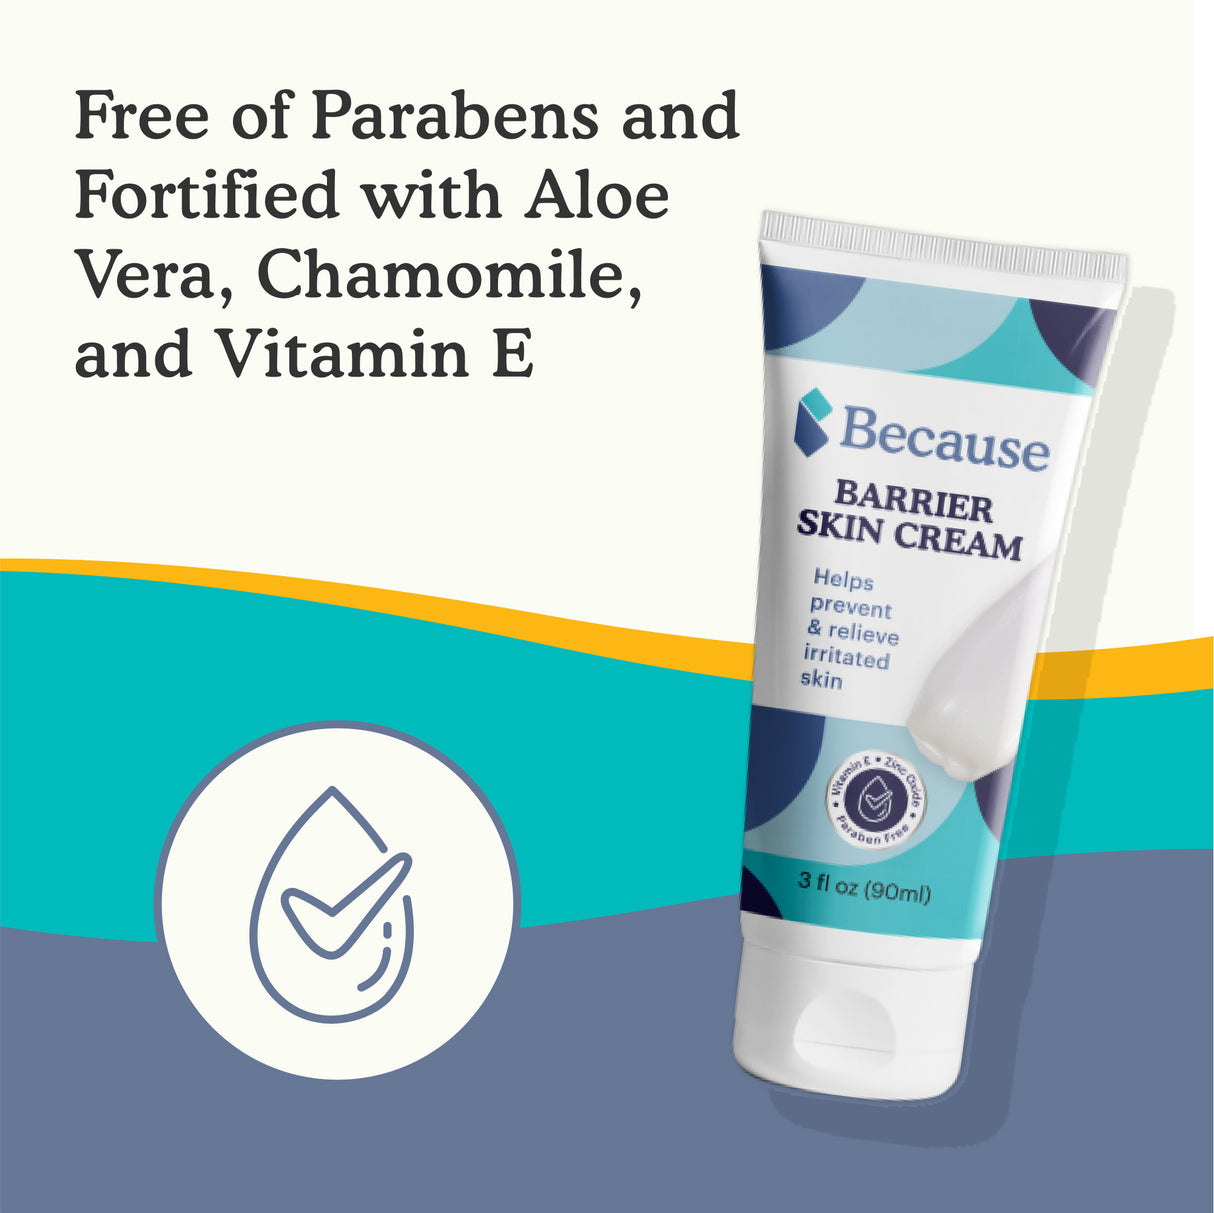 Free of parabens and fortified with Aloe vera, chamomile, and Vitamin E.